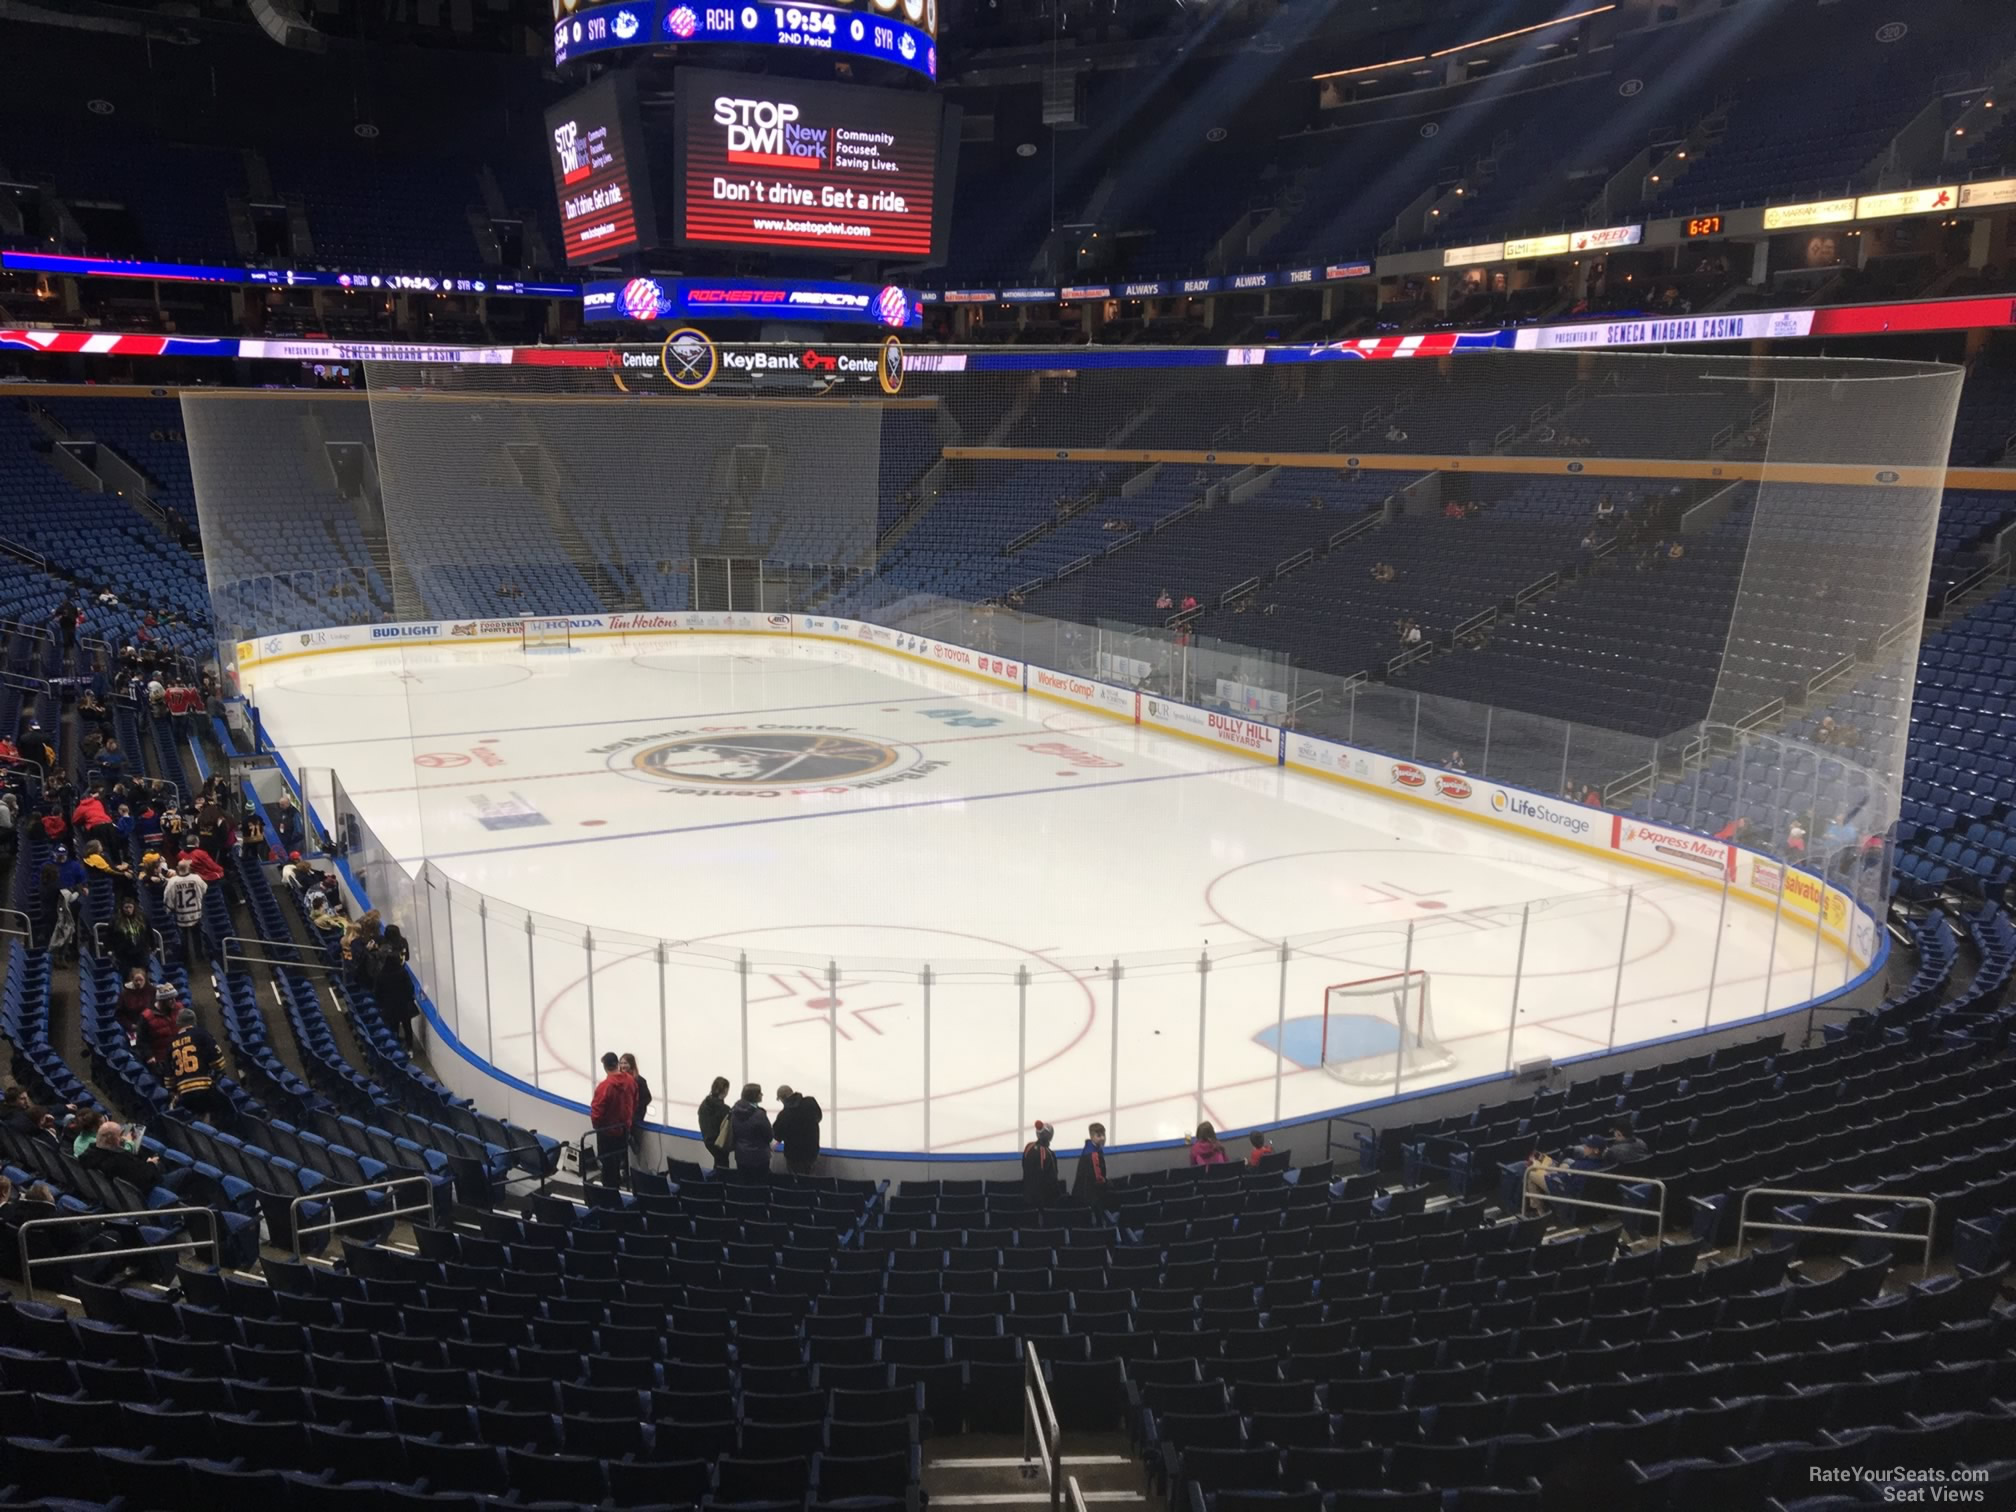 section 201, row 4 seat view  for hockey - keybank center